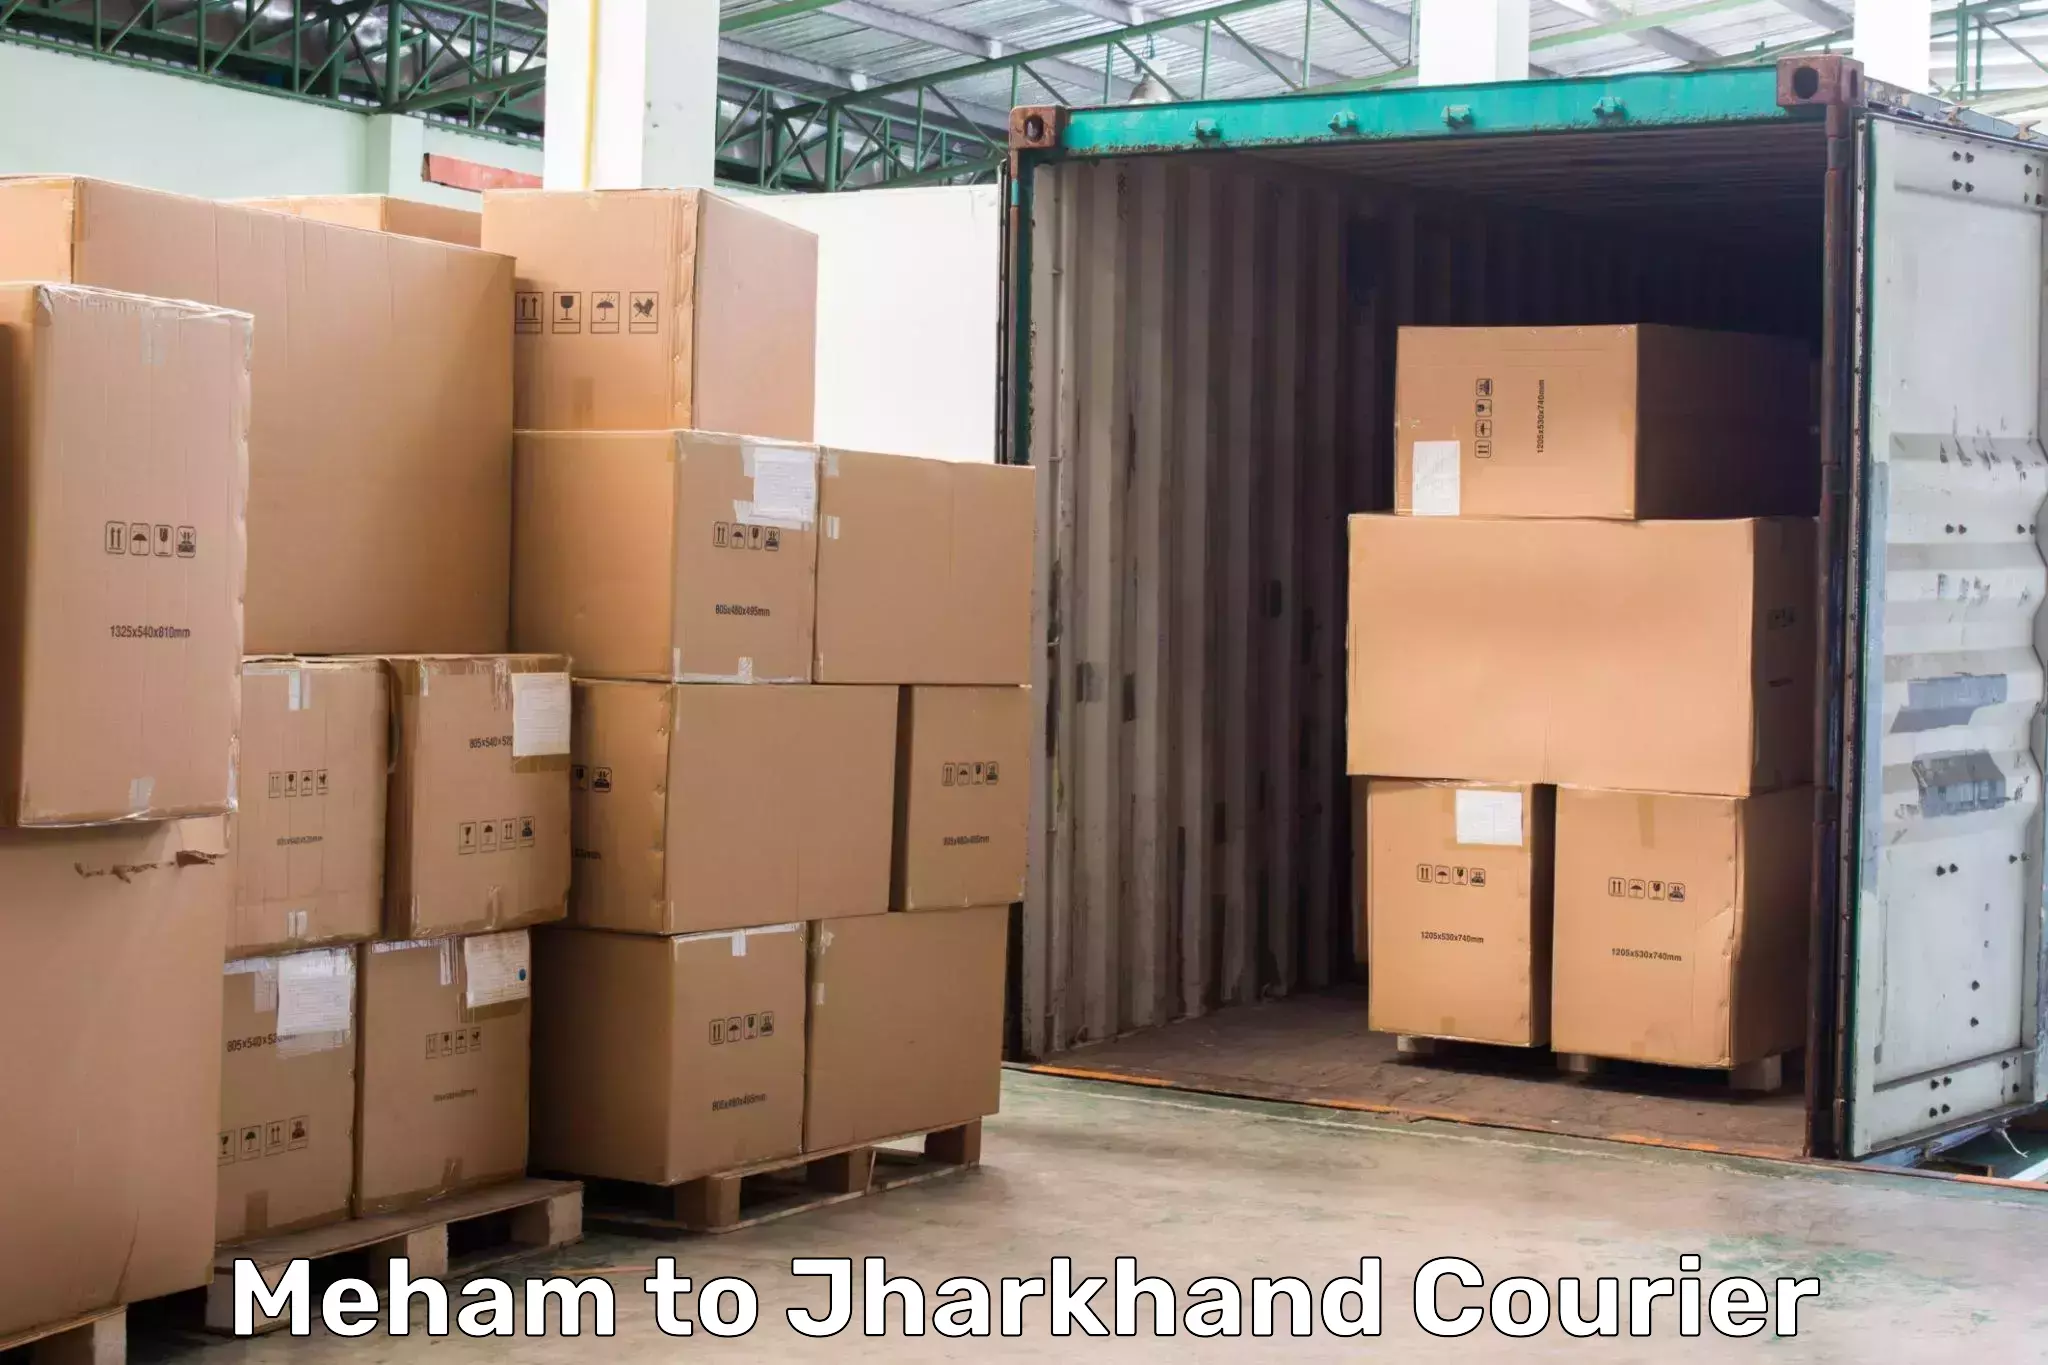 Efficient order fulfillment in Meham to Jharkhand